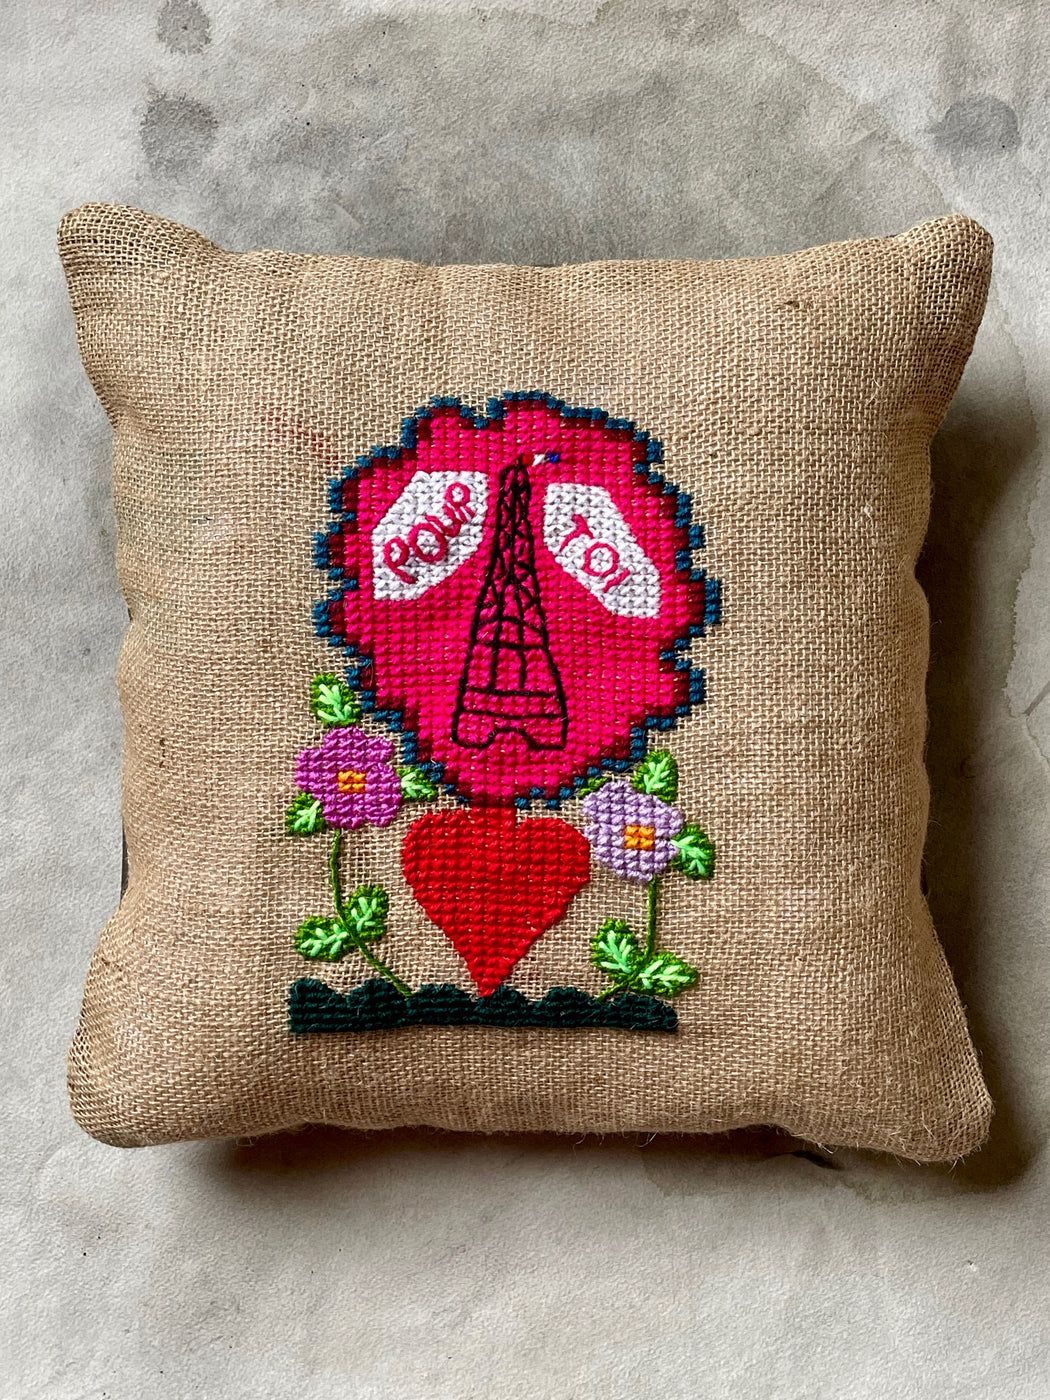 "Pour Toi" Hand-Embroidered Pillow by Nathalie Lete